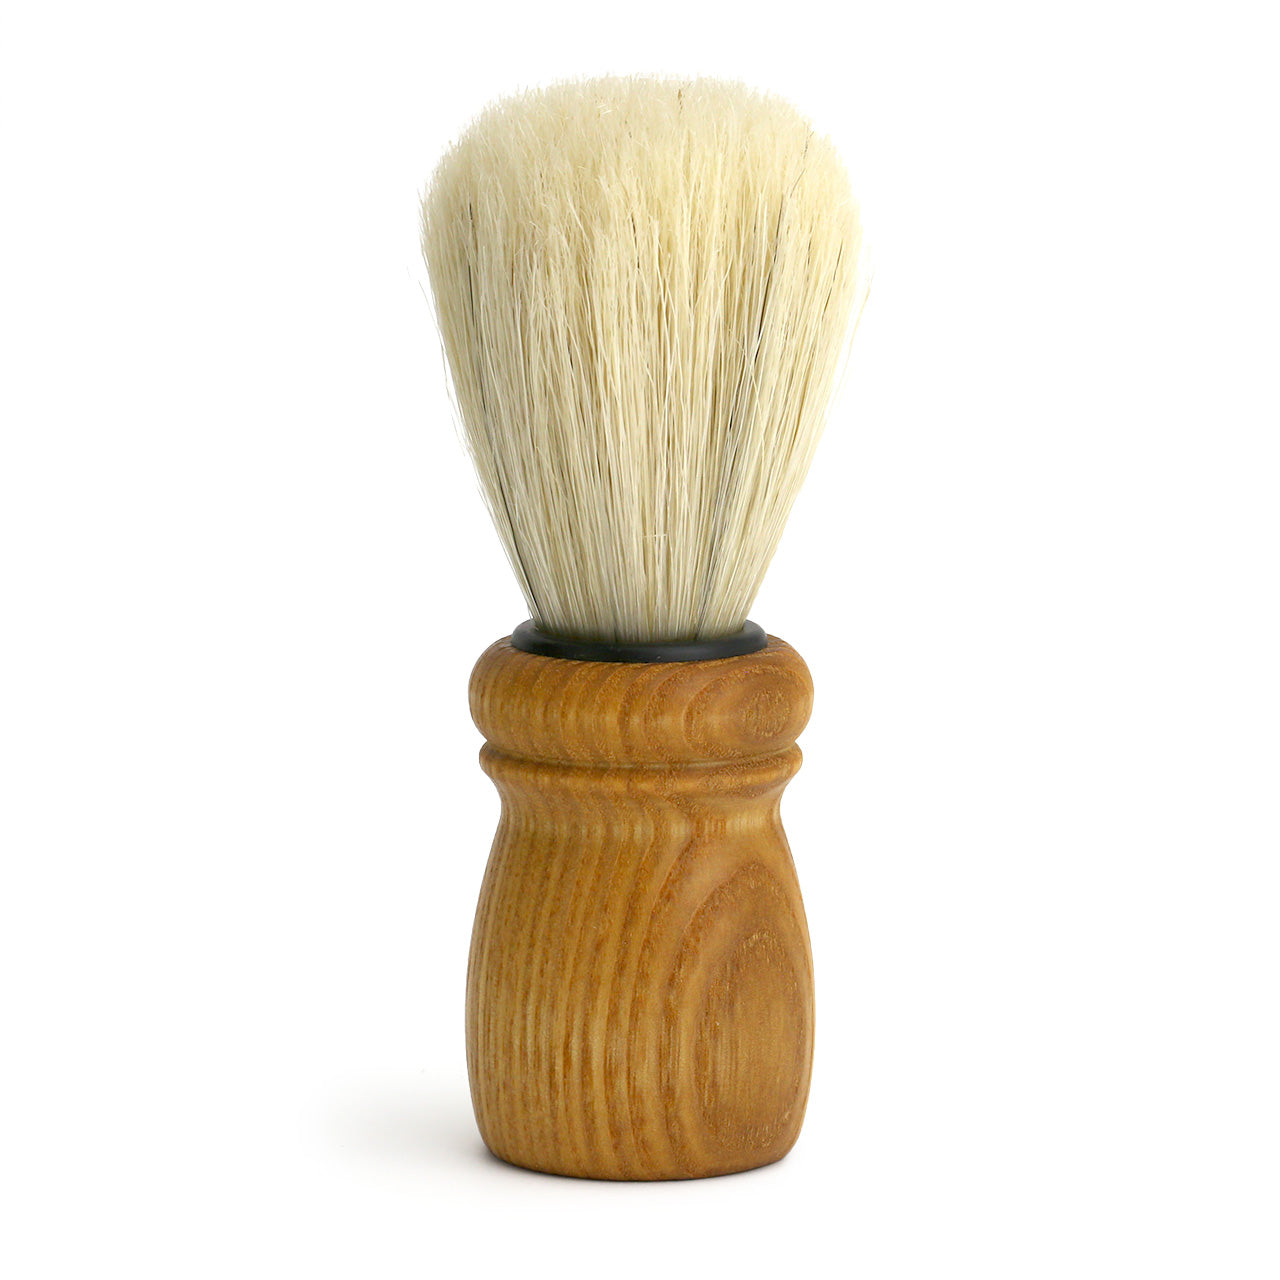 Natural Beechwood shaving brush with a substantial boar knot